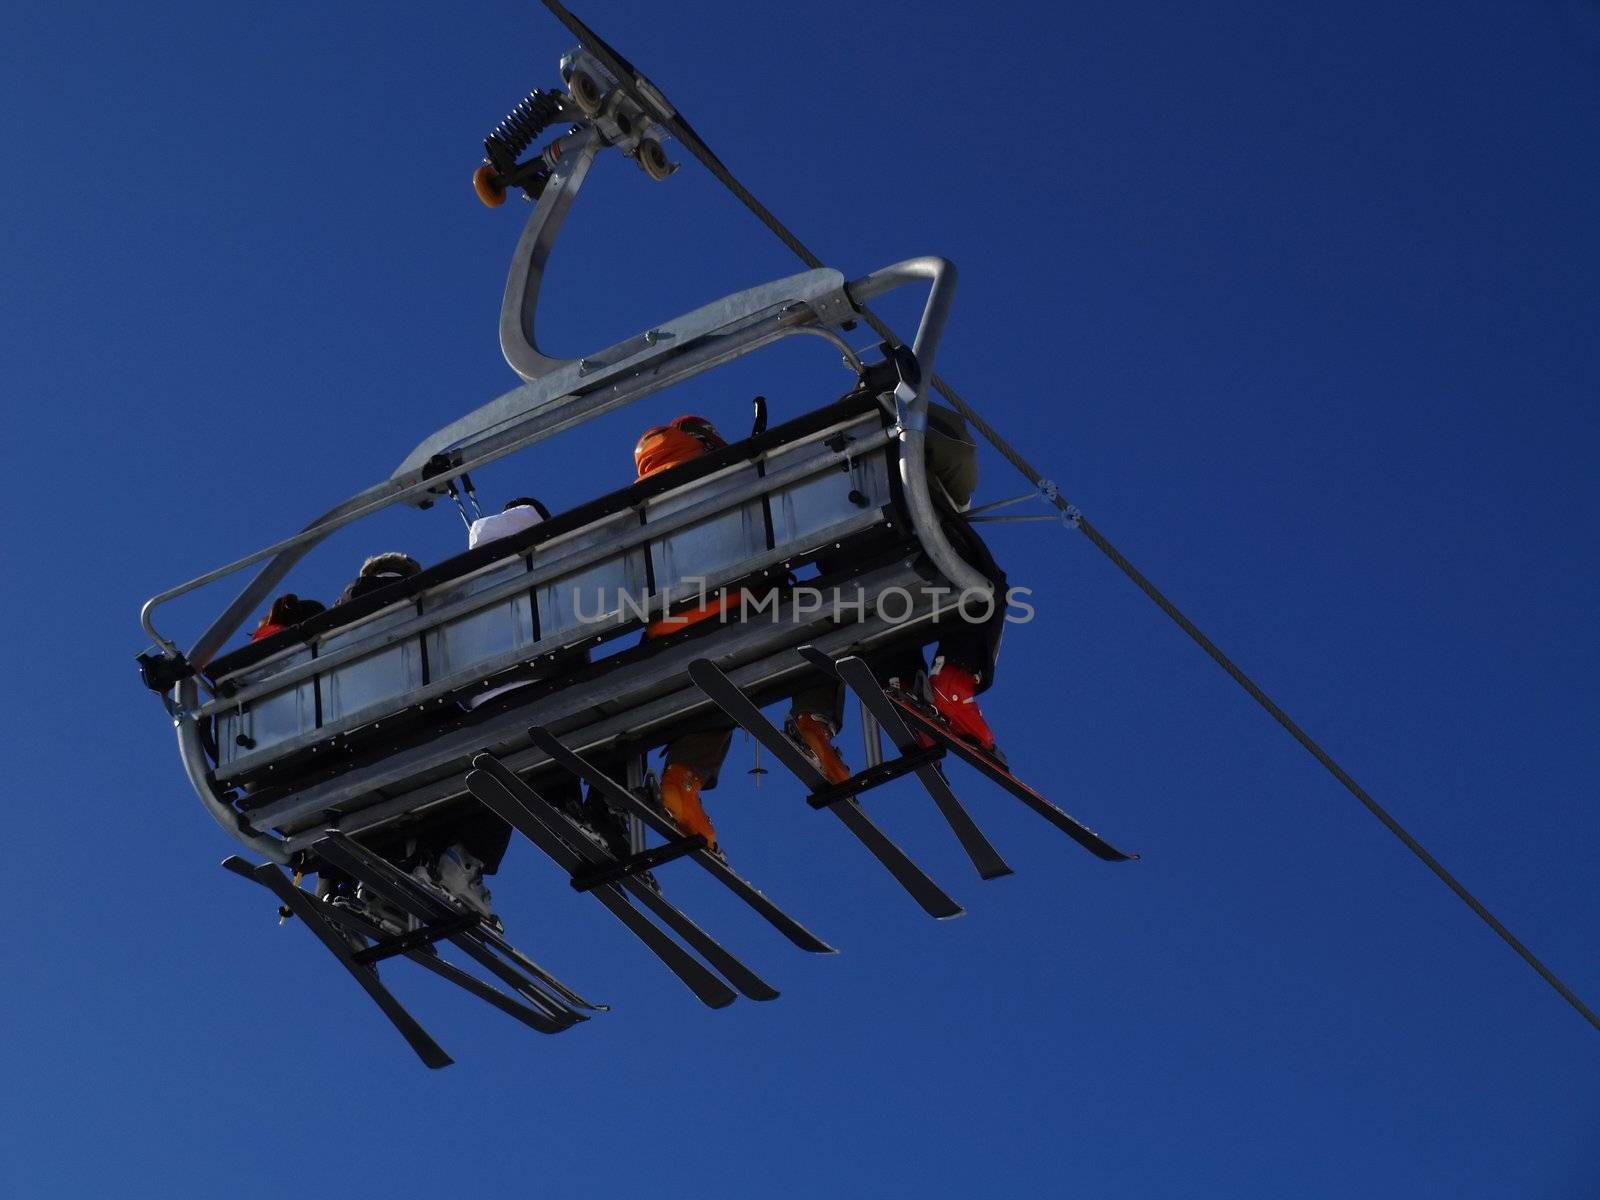 Ski lift carrying skiers. by anderm